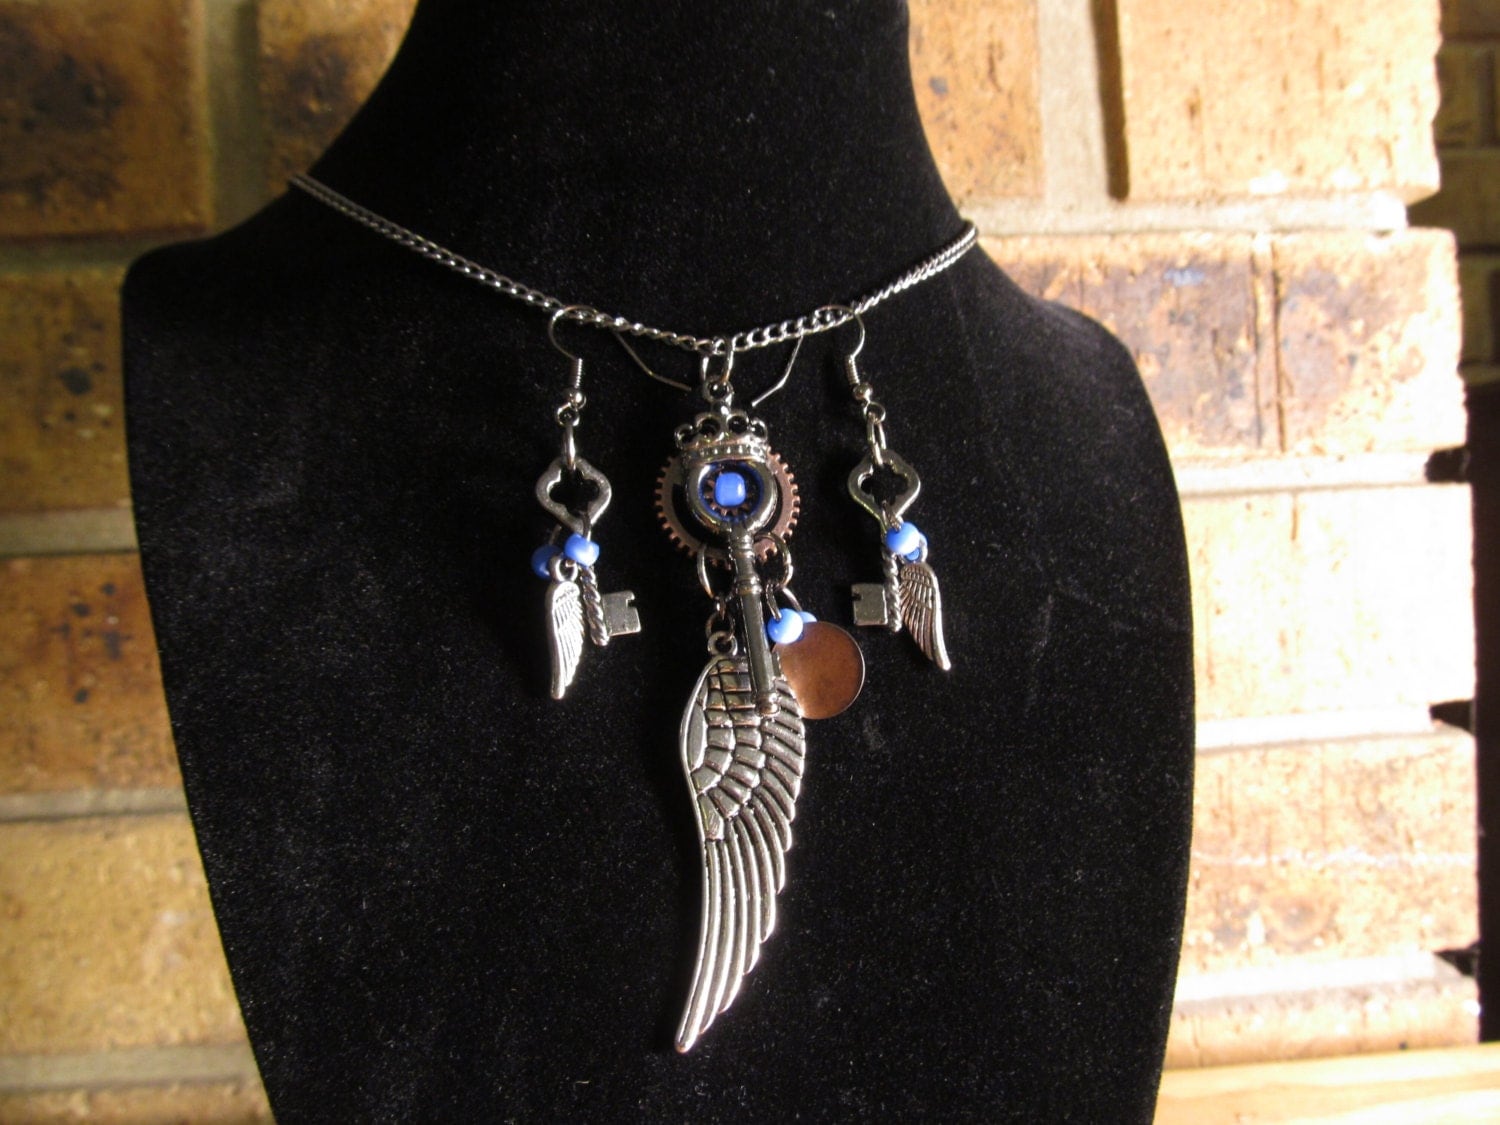 Steampunk Winged Key Necklace and Earring set.